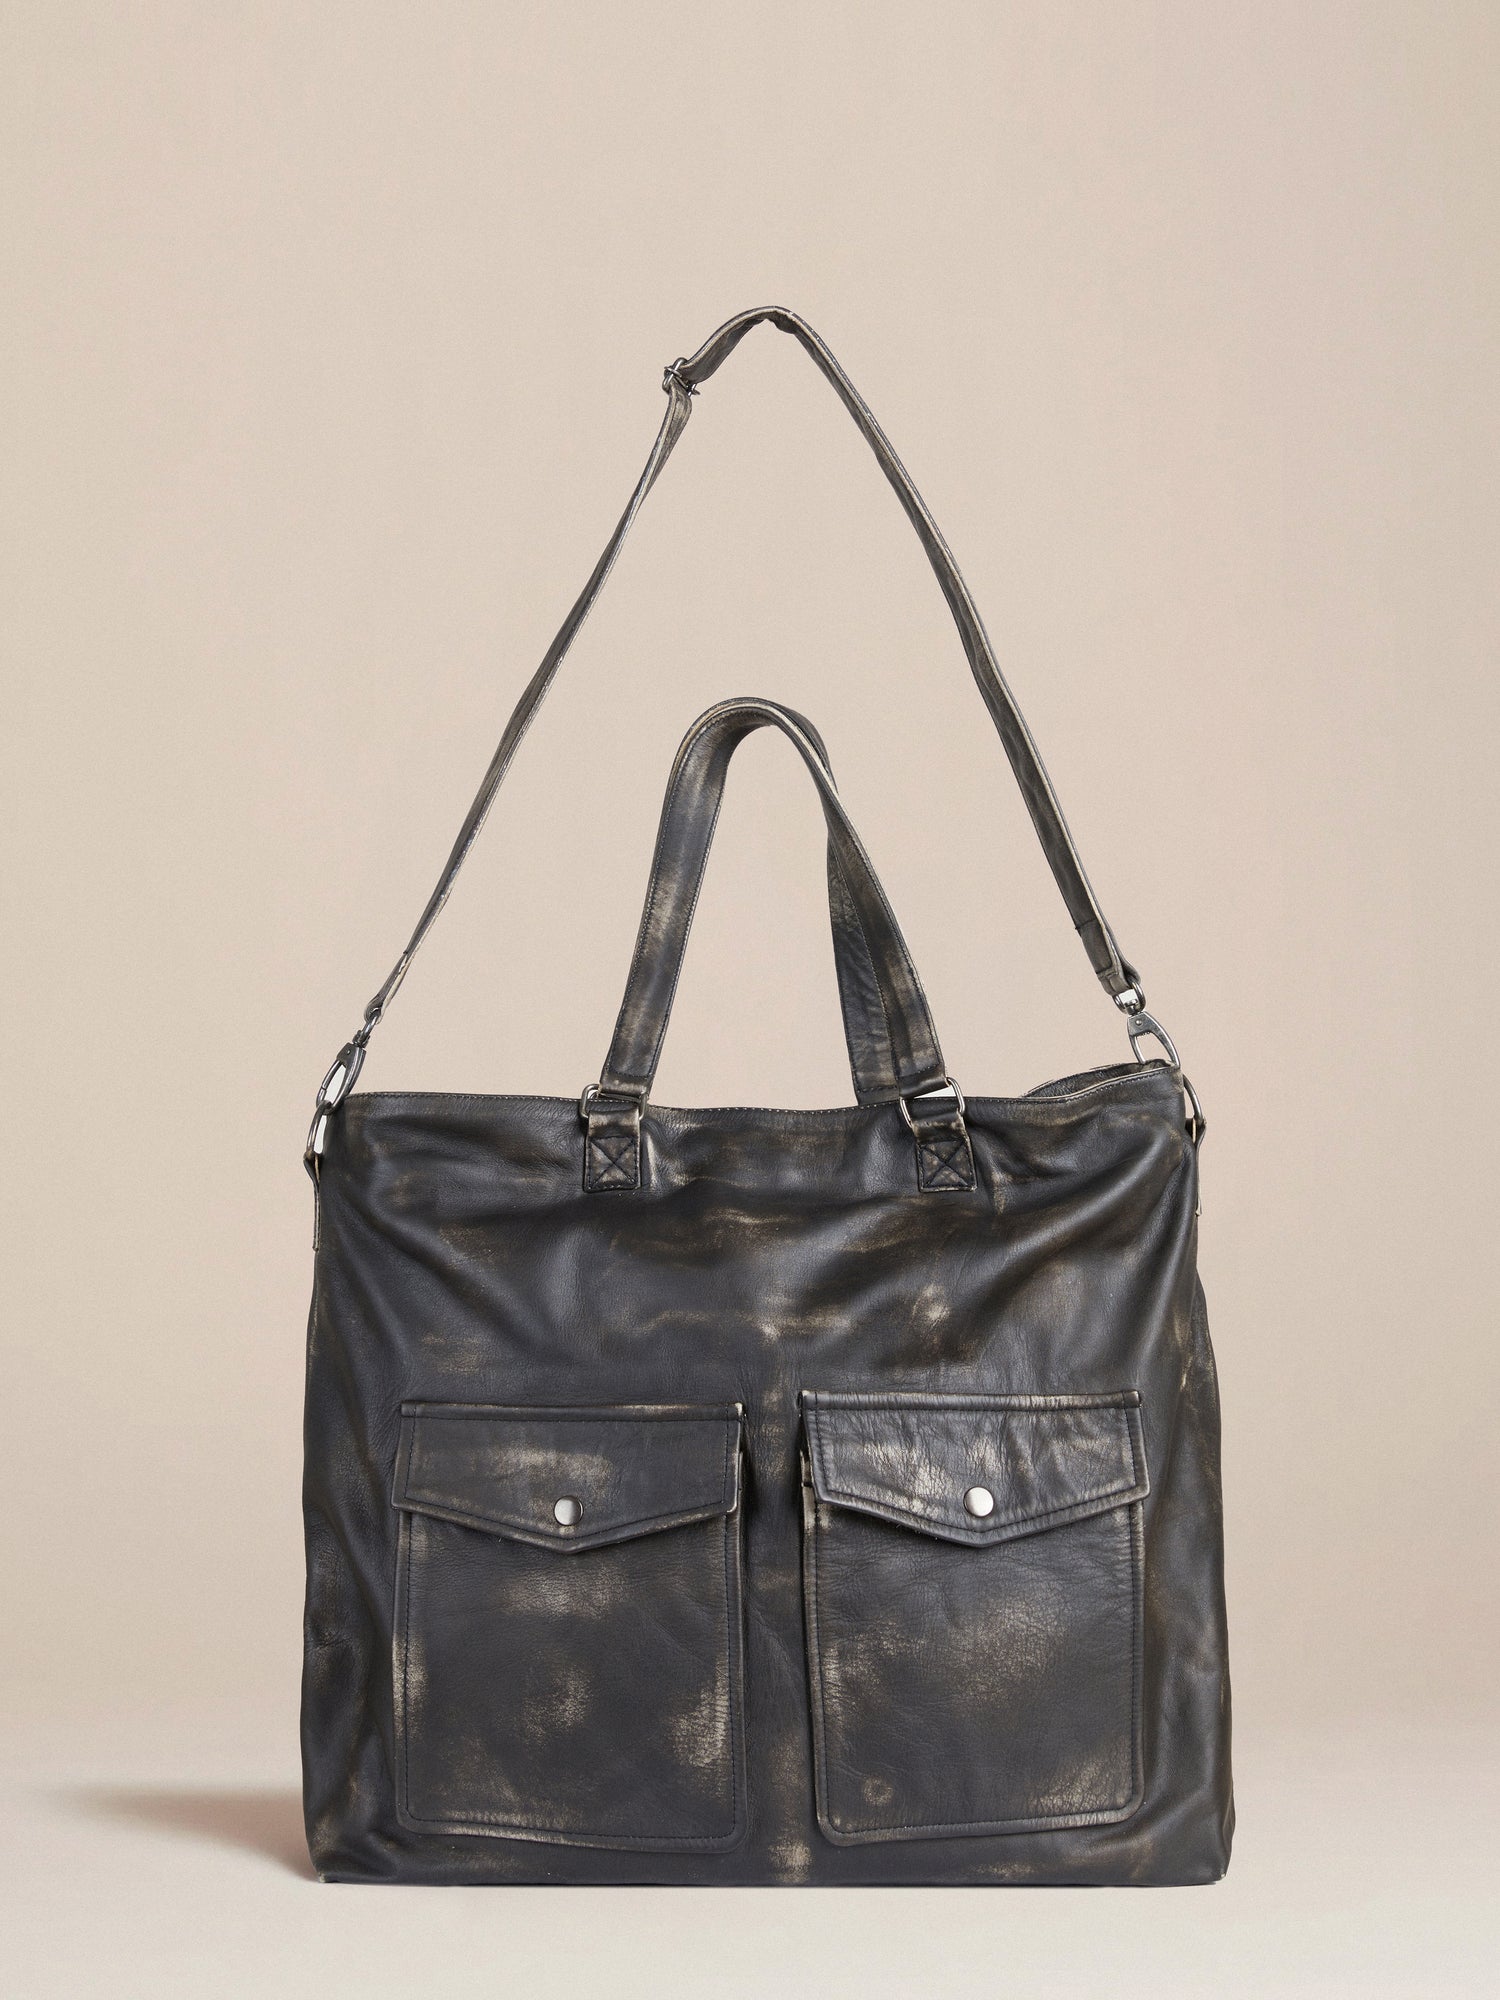 A premium Profound Hana distressed black leather duffel bag with two pockets.